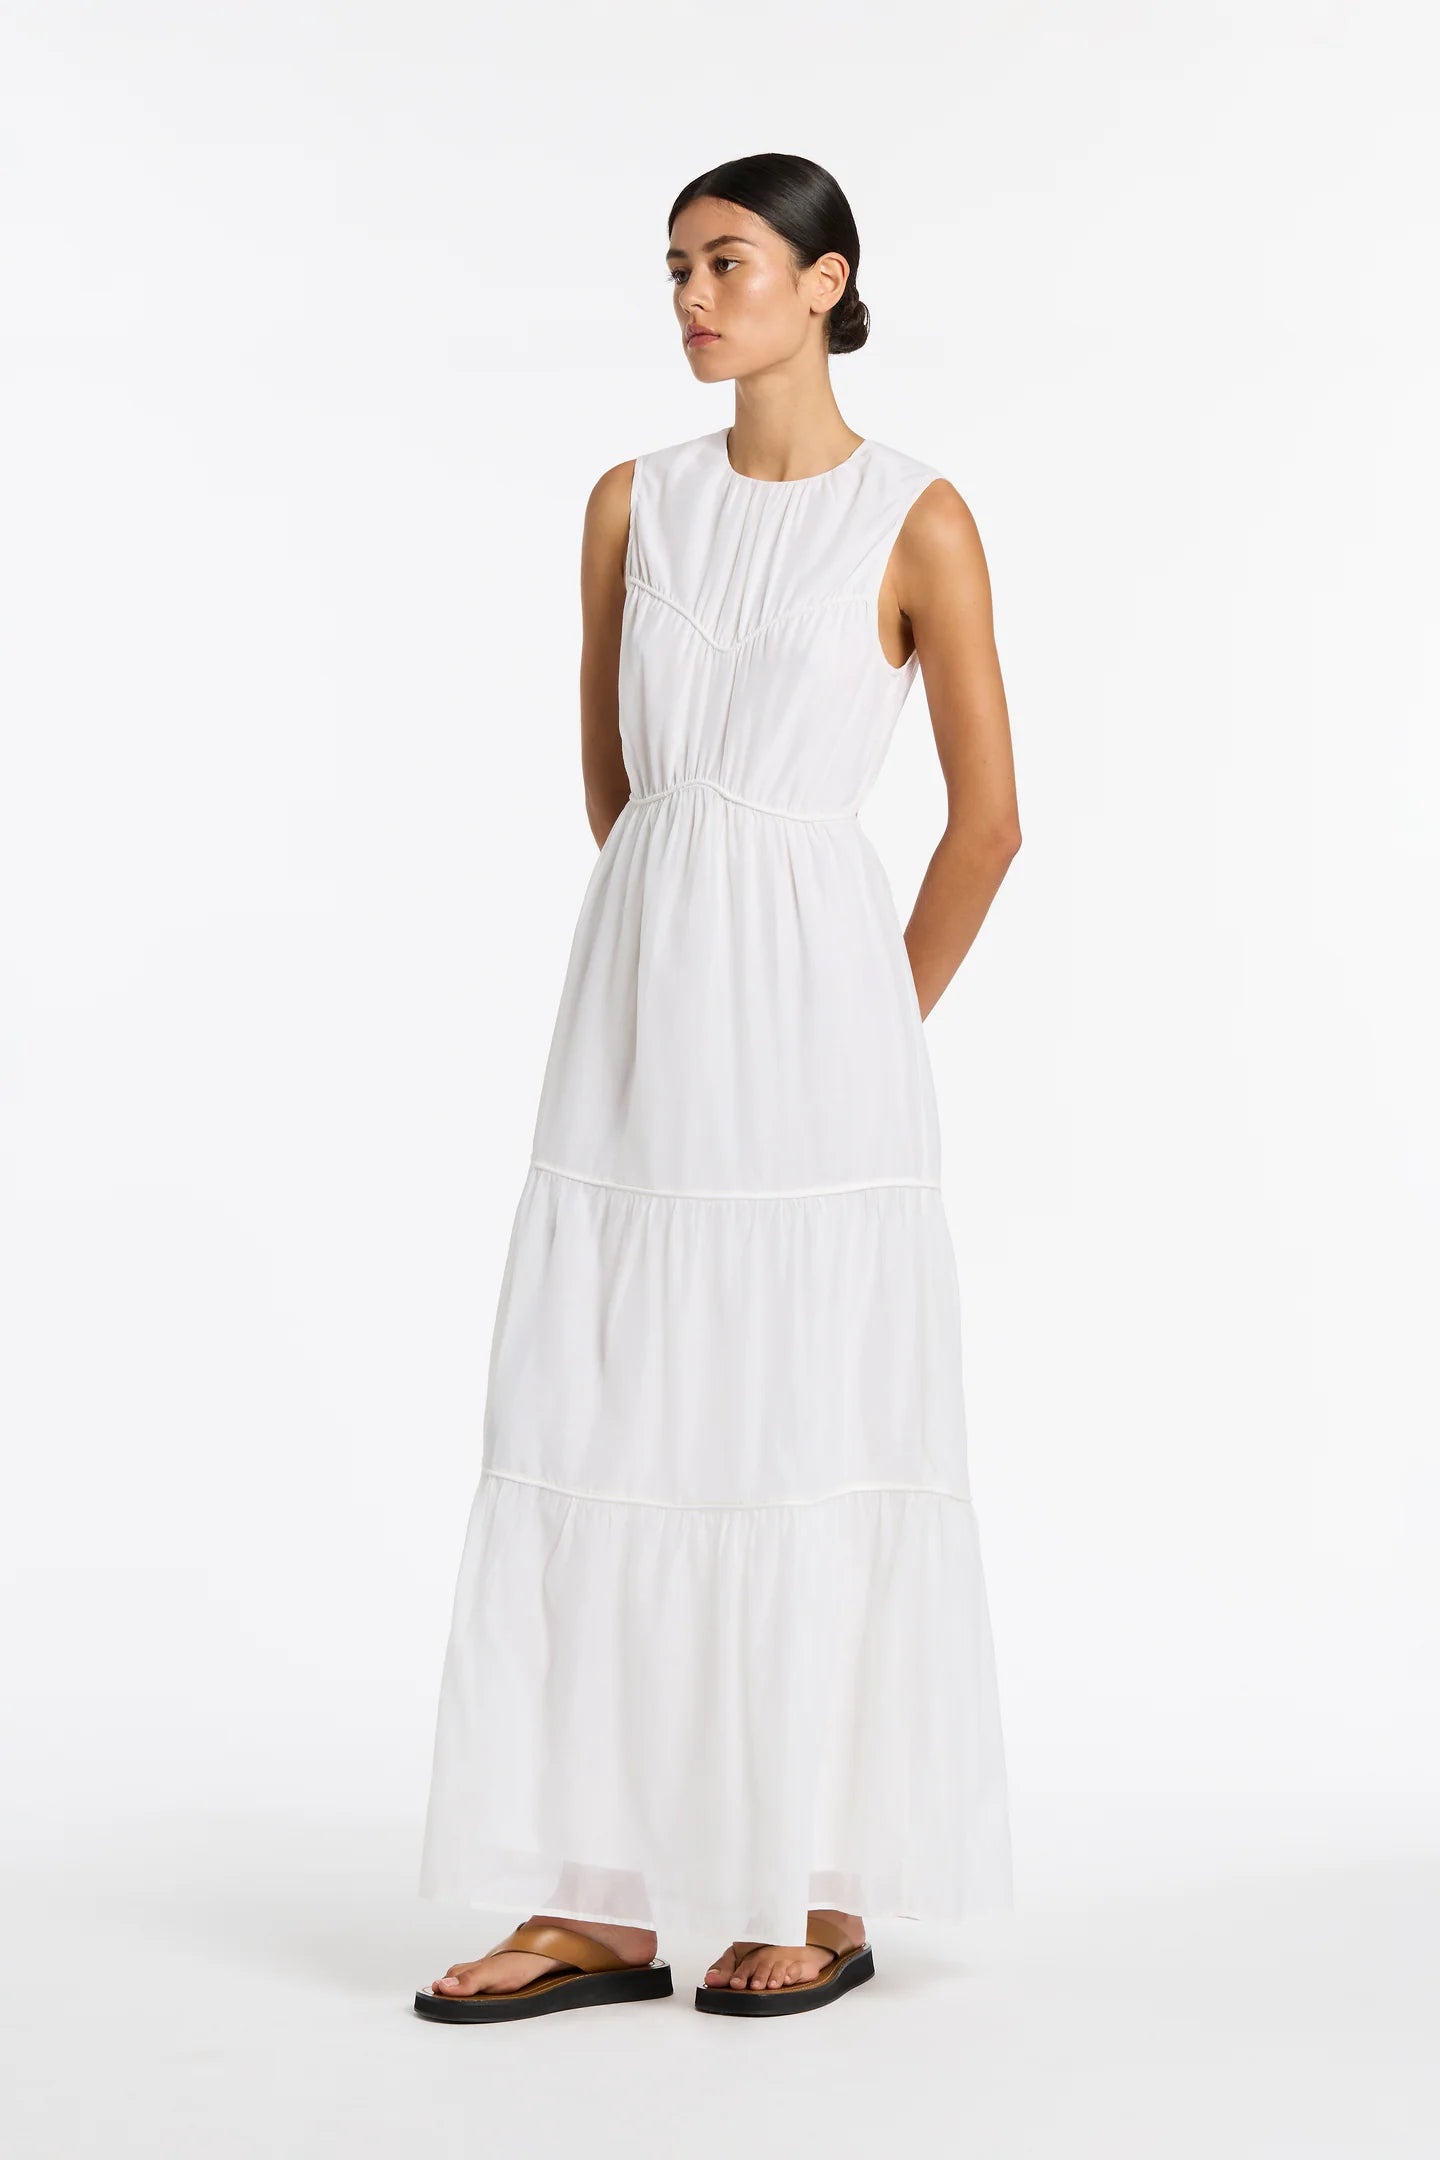 SIR. - EMME TIERED DRESS - IVORY